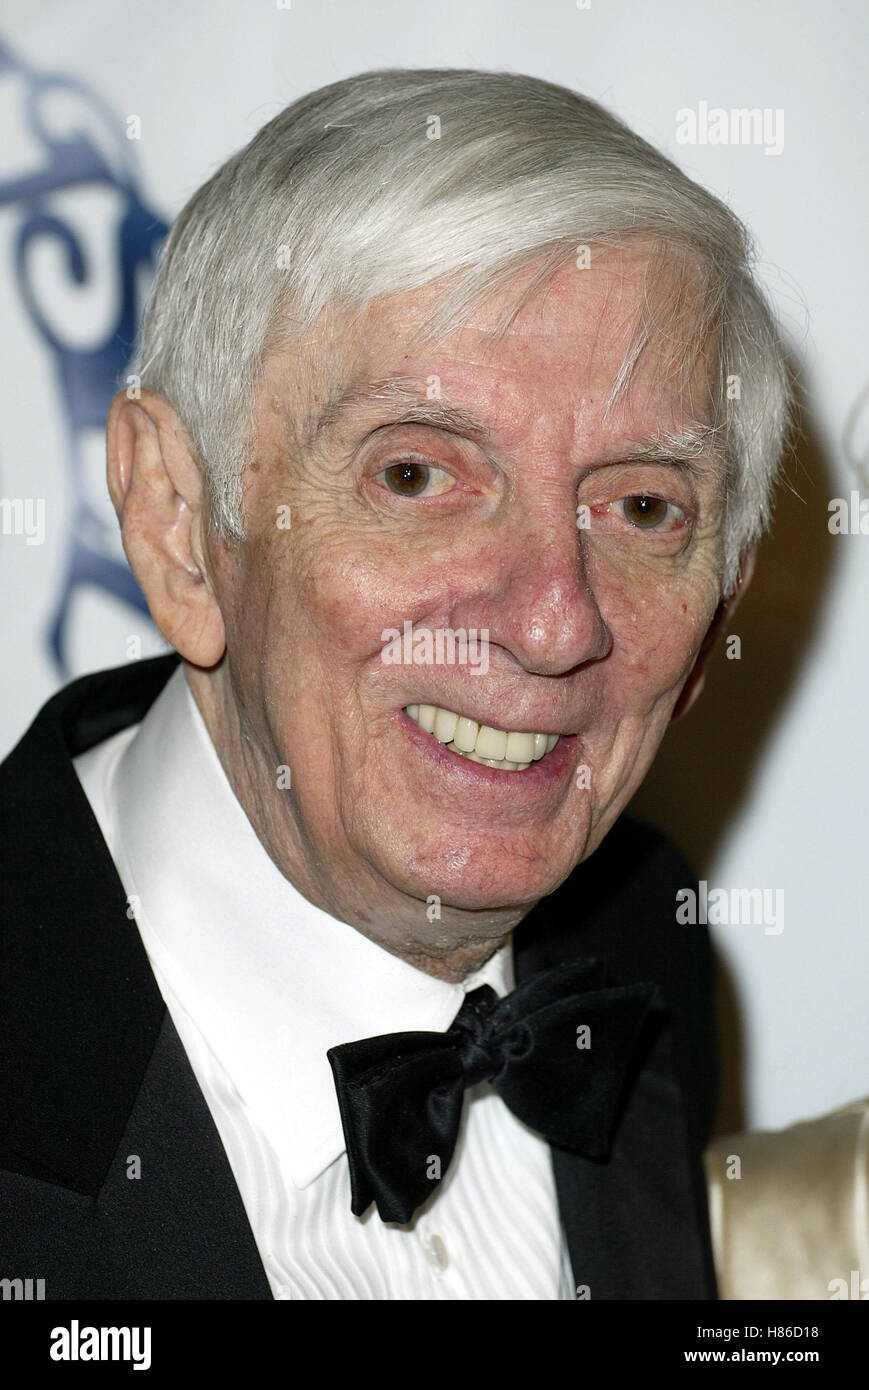 Aaron Spelling High Resolution Stock Photography and Images - Alamy